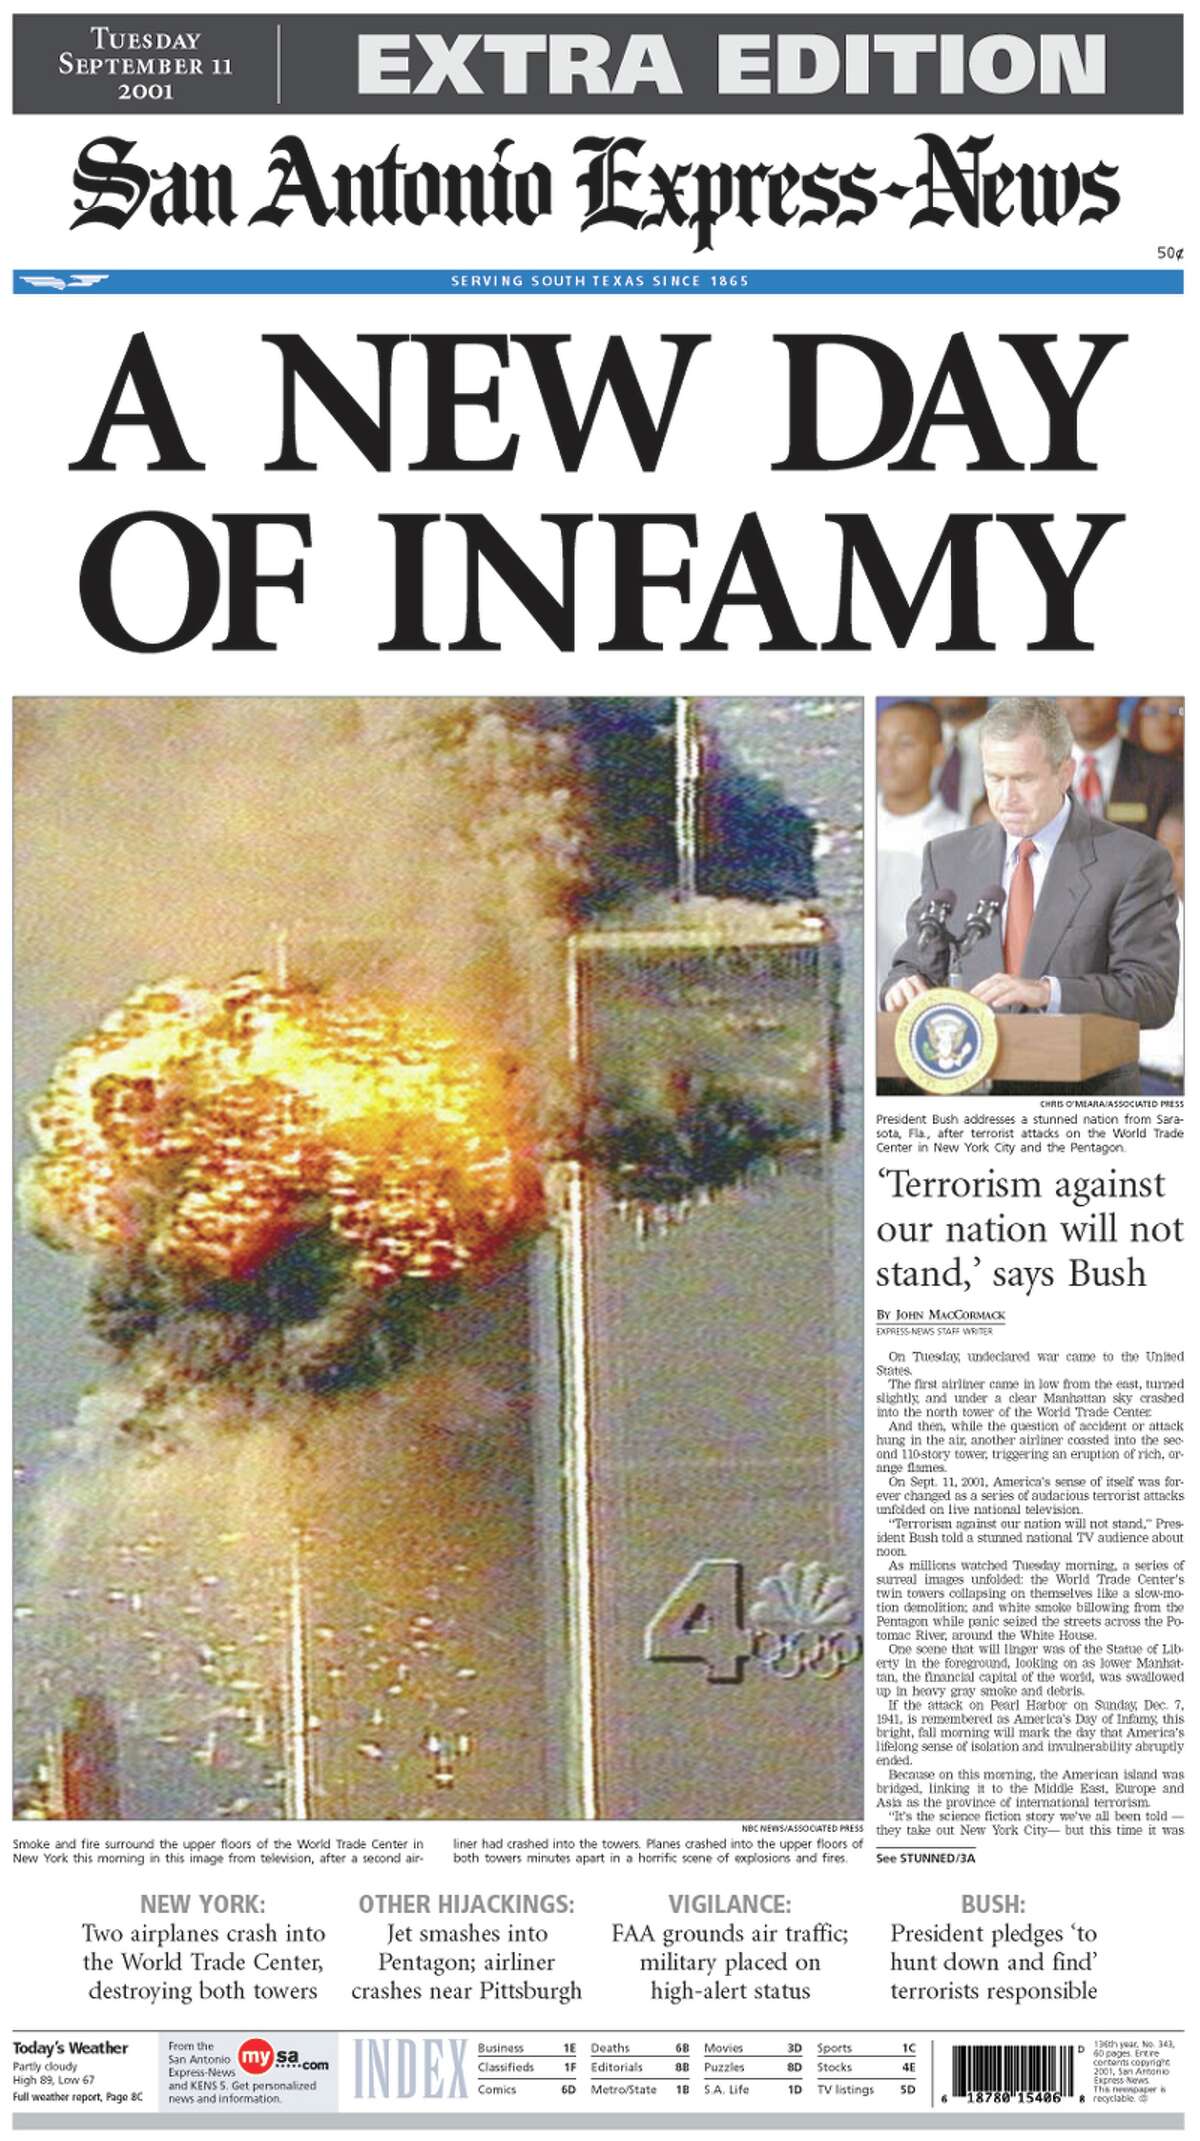 San Antonio Express-News Sept. 11, 2001. Extra Edition front page.